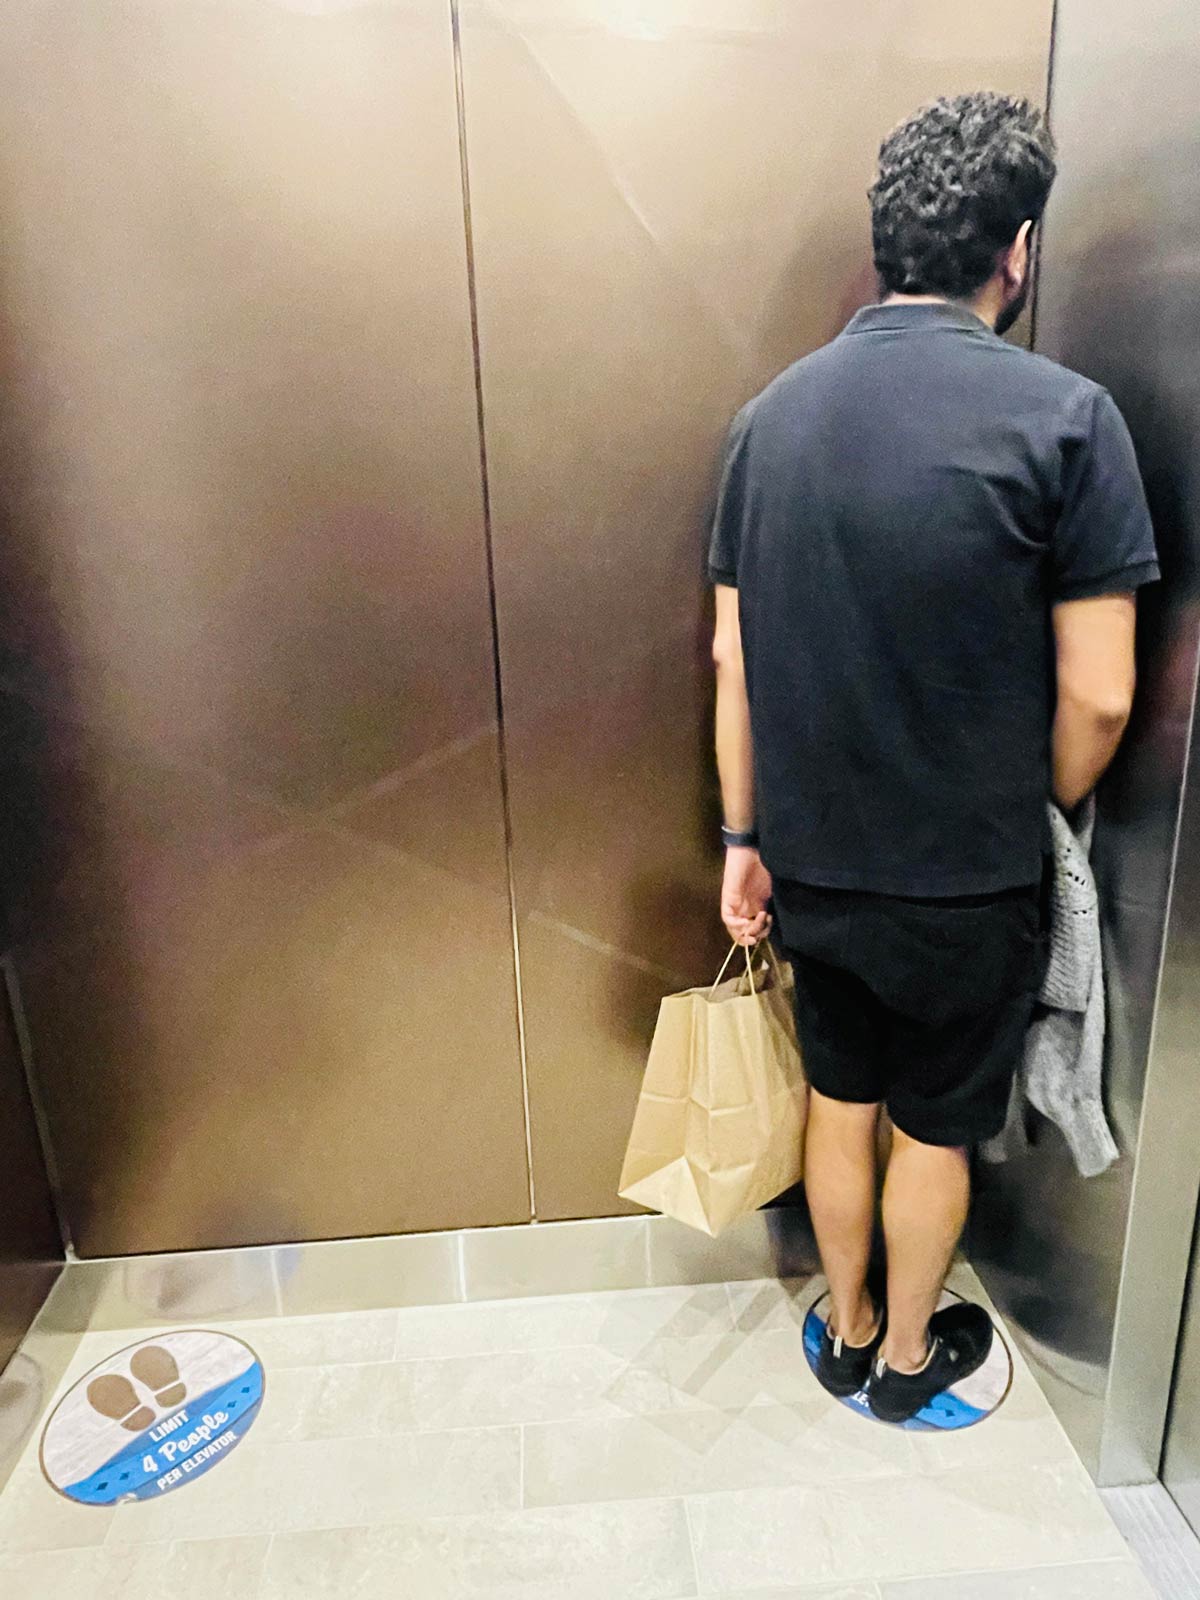 Following the signs while riding an elevator